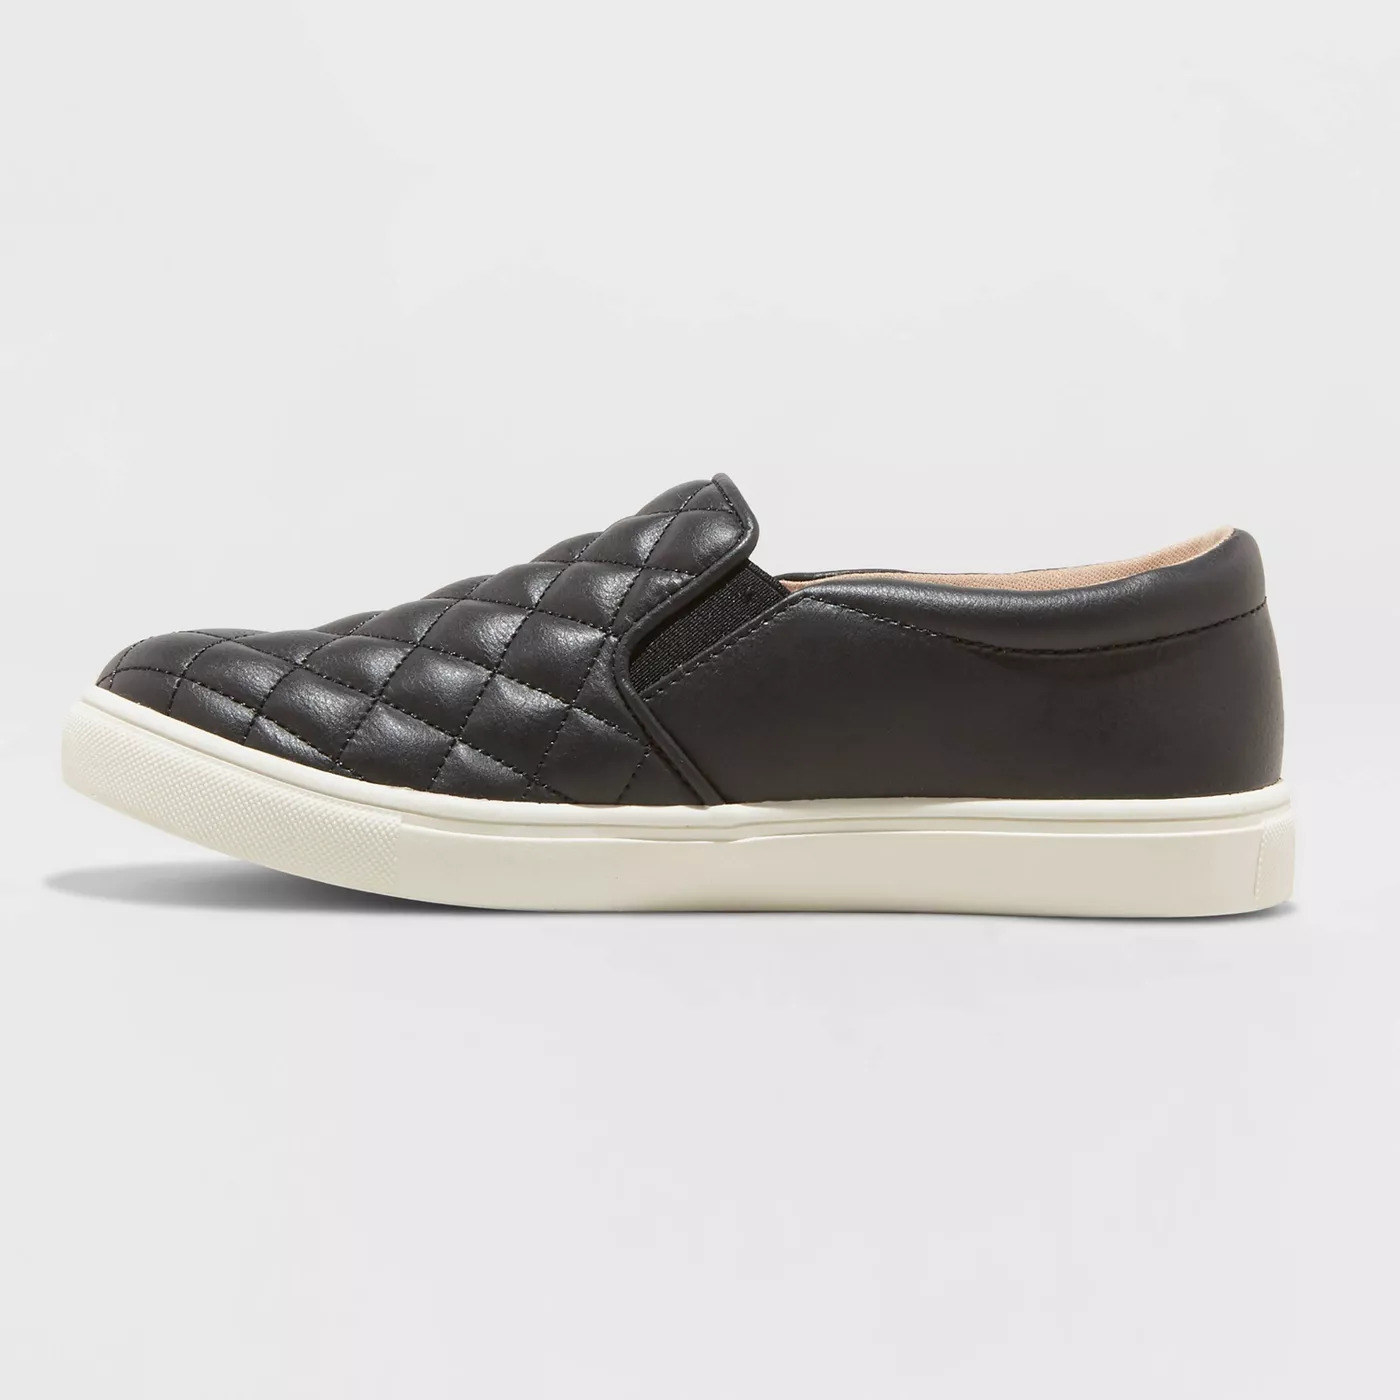 a quilted black faux leather upper with a white rubber sole